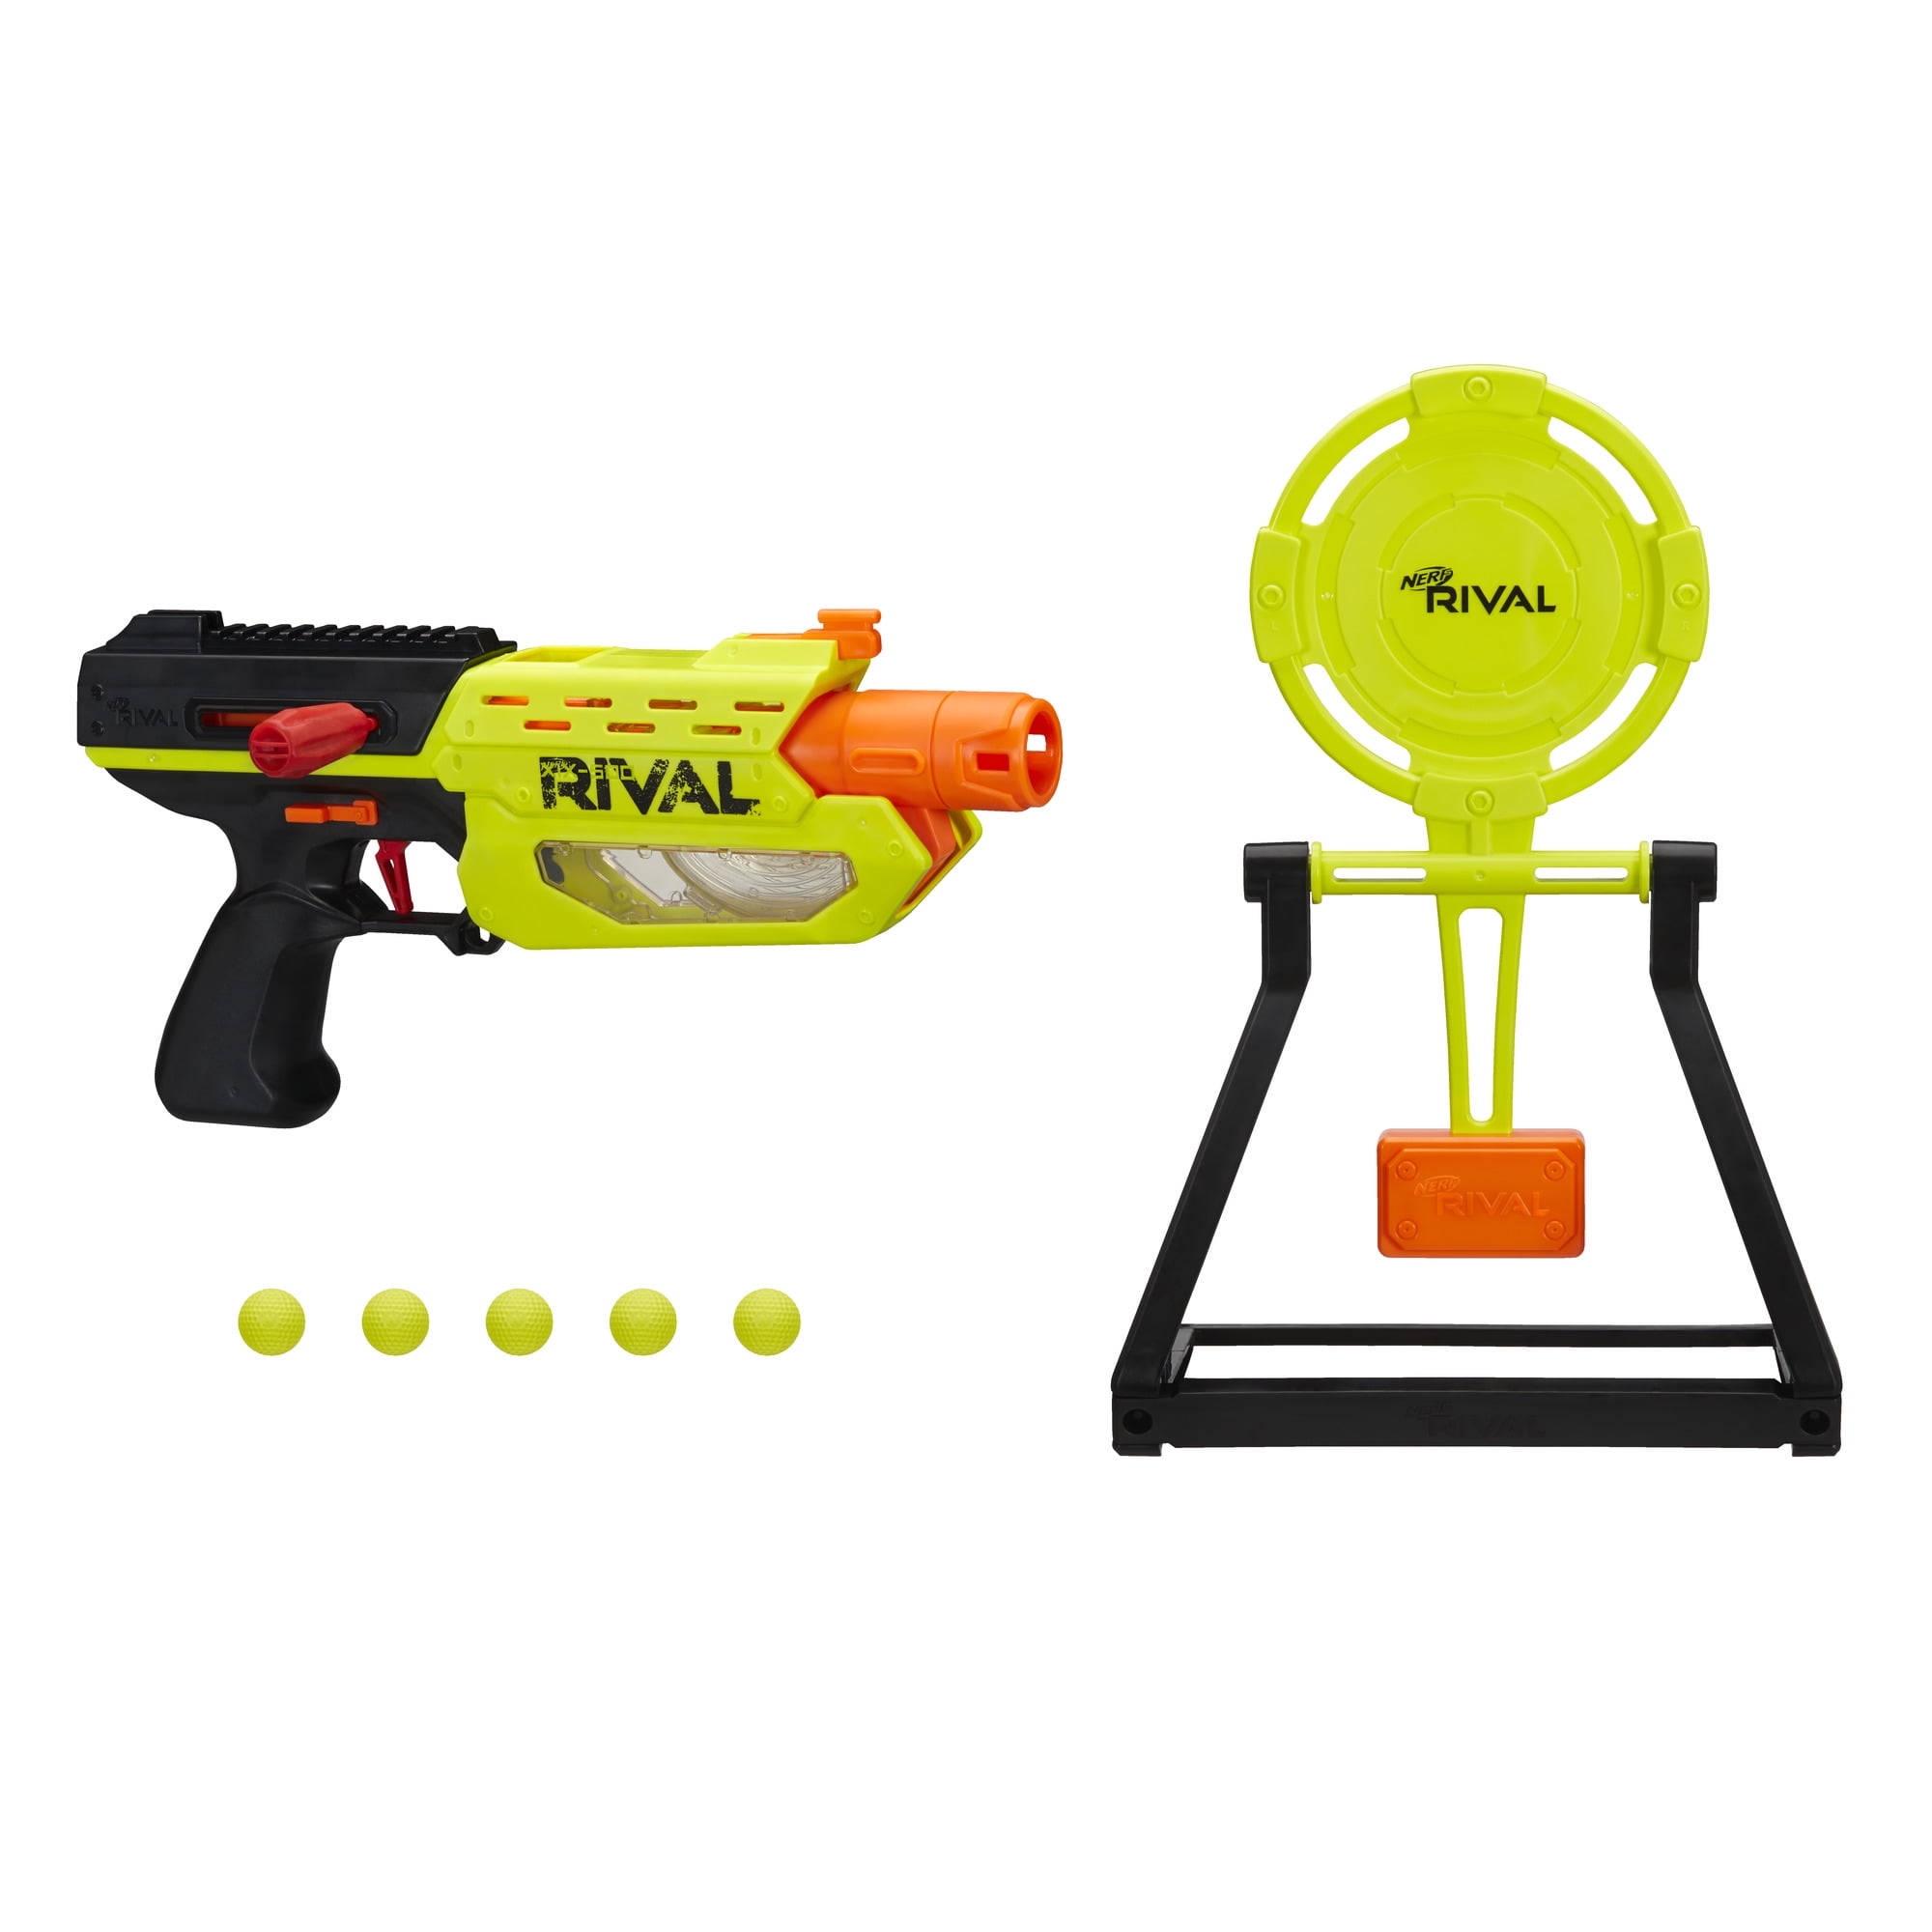 NERF Rival XX1000 Targeting Set 10 Round for sale online 